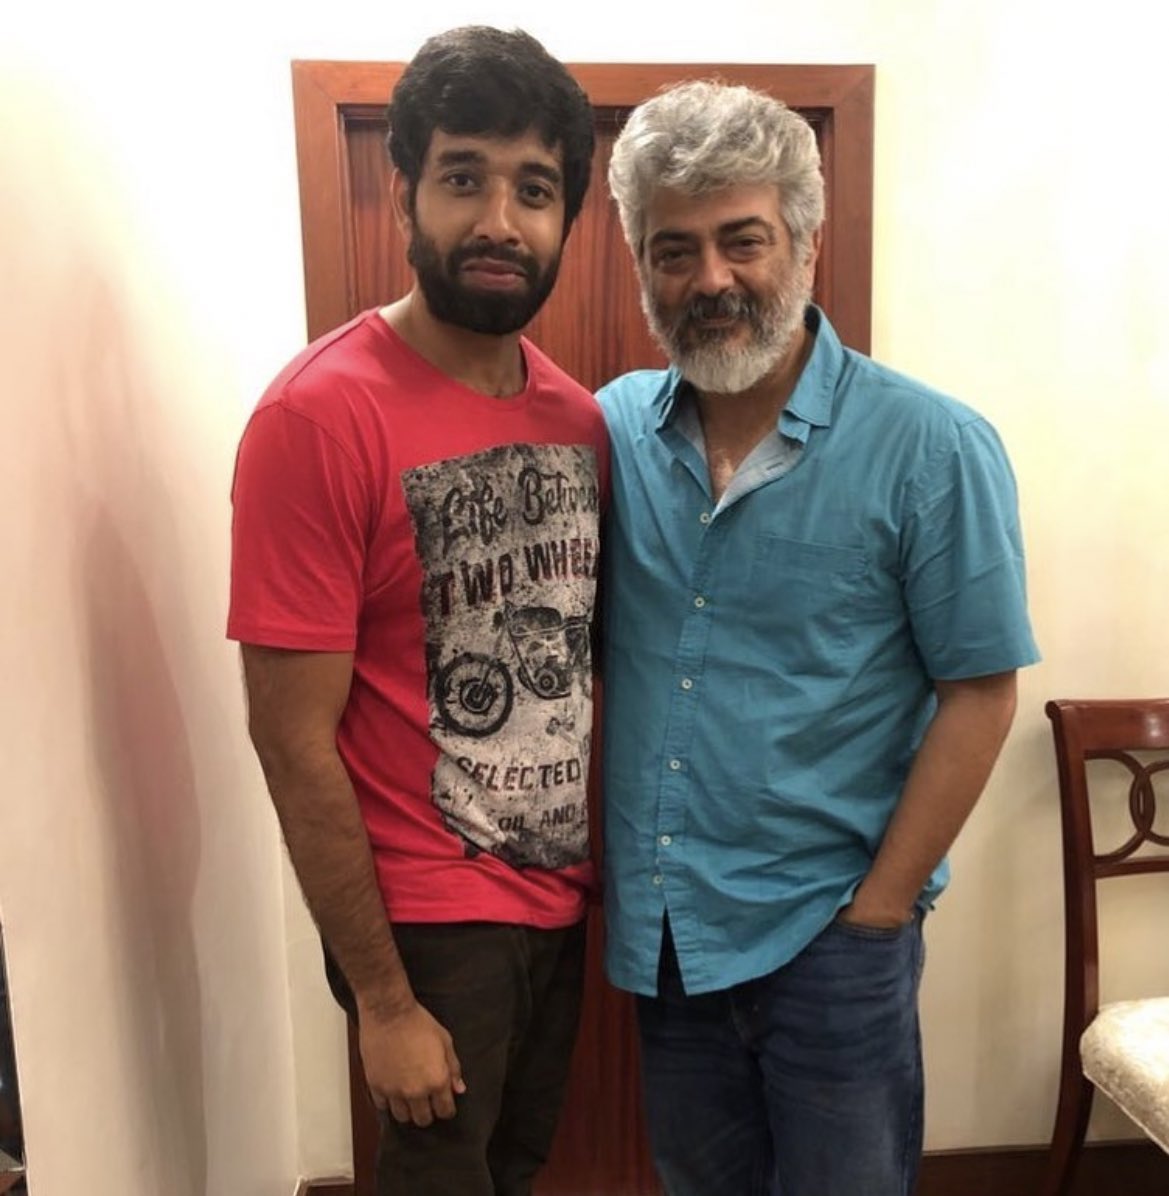 The possibility of a new combo featuring #AjithKumar and his fan boy #AdhikRavichandran is generating immense excitement! 🔥 The reported discussions about a significant salary for AK, potentially exceeding 150 crores, are adding to the buzz! 💰🎬